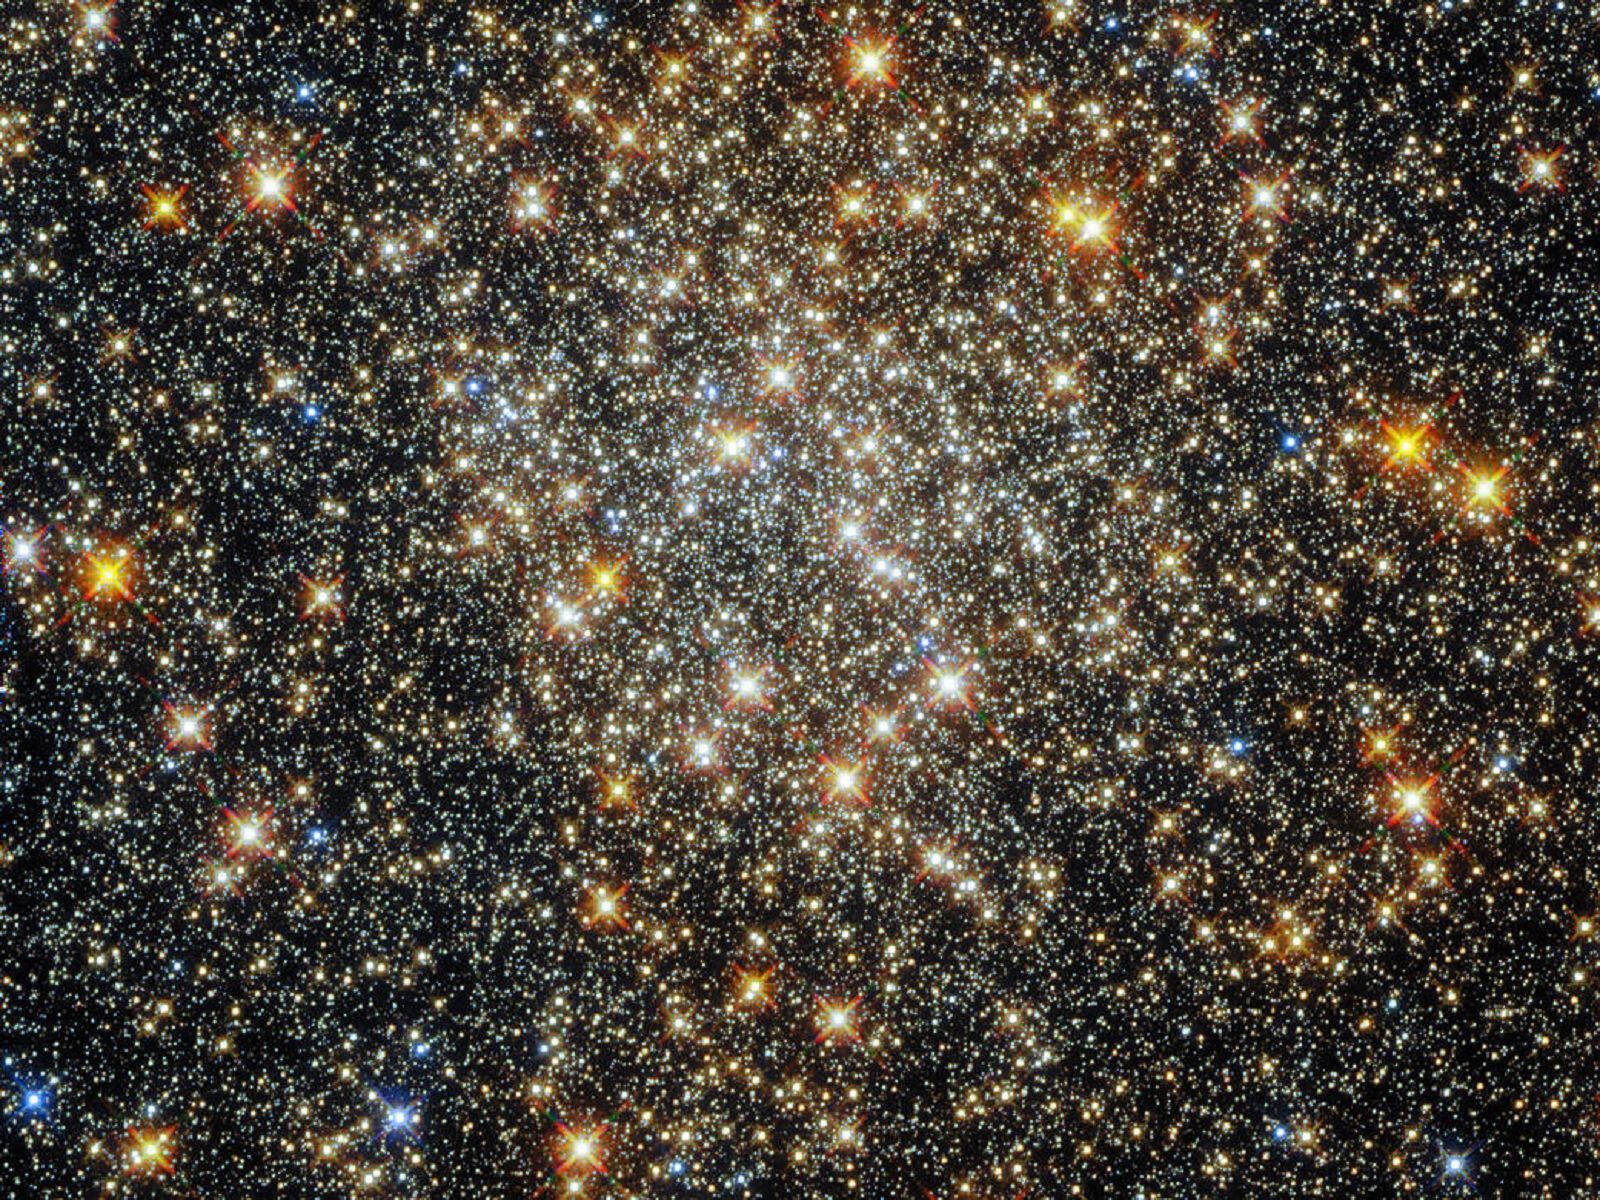 astounding images from the depths of the universe courtesy of the hubble space telescope photo 43